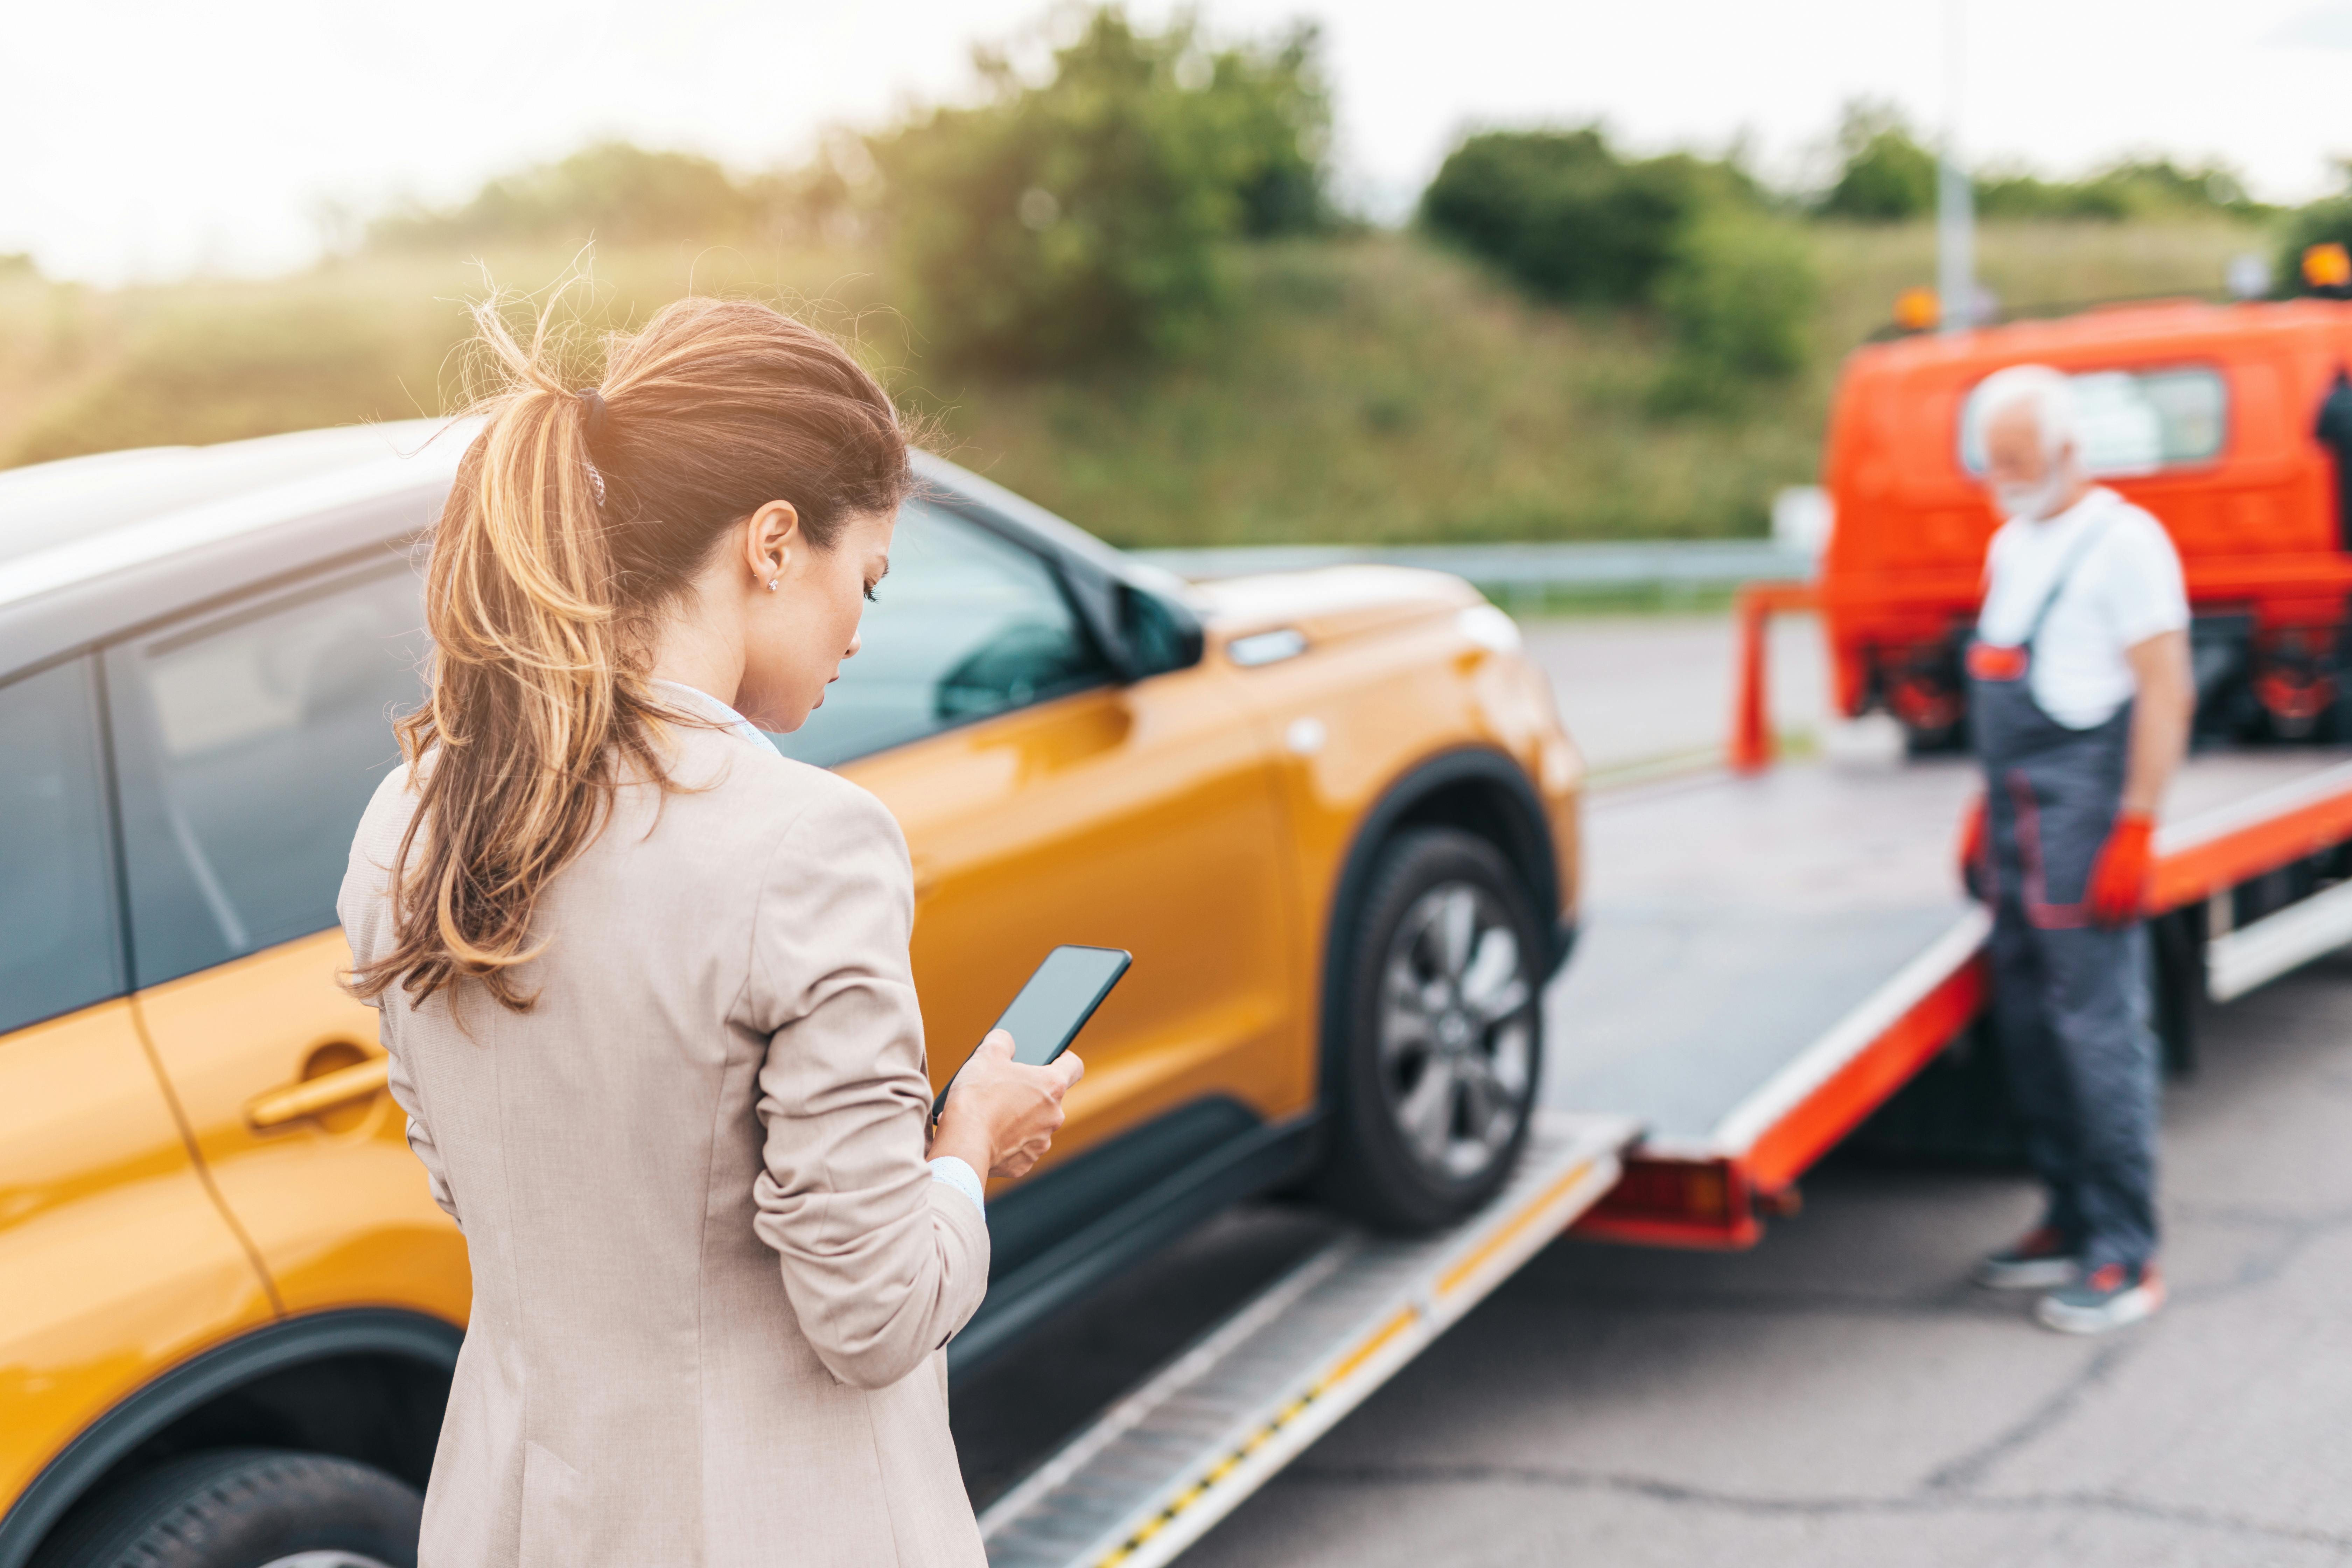 Return service and towing damages